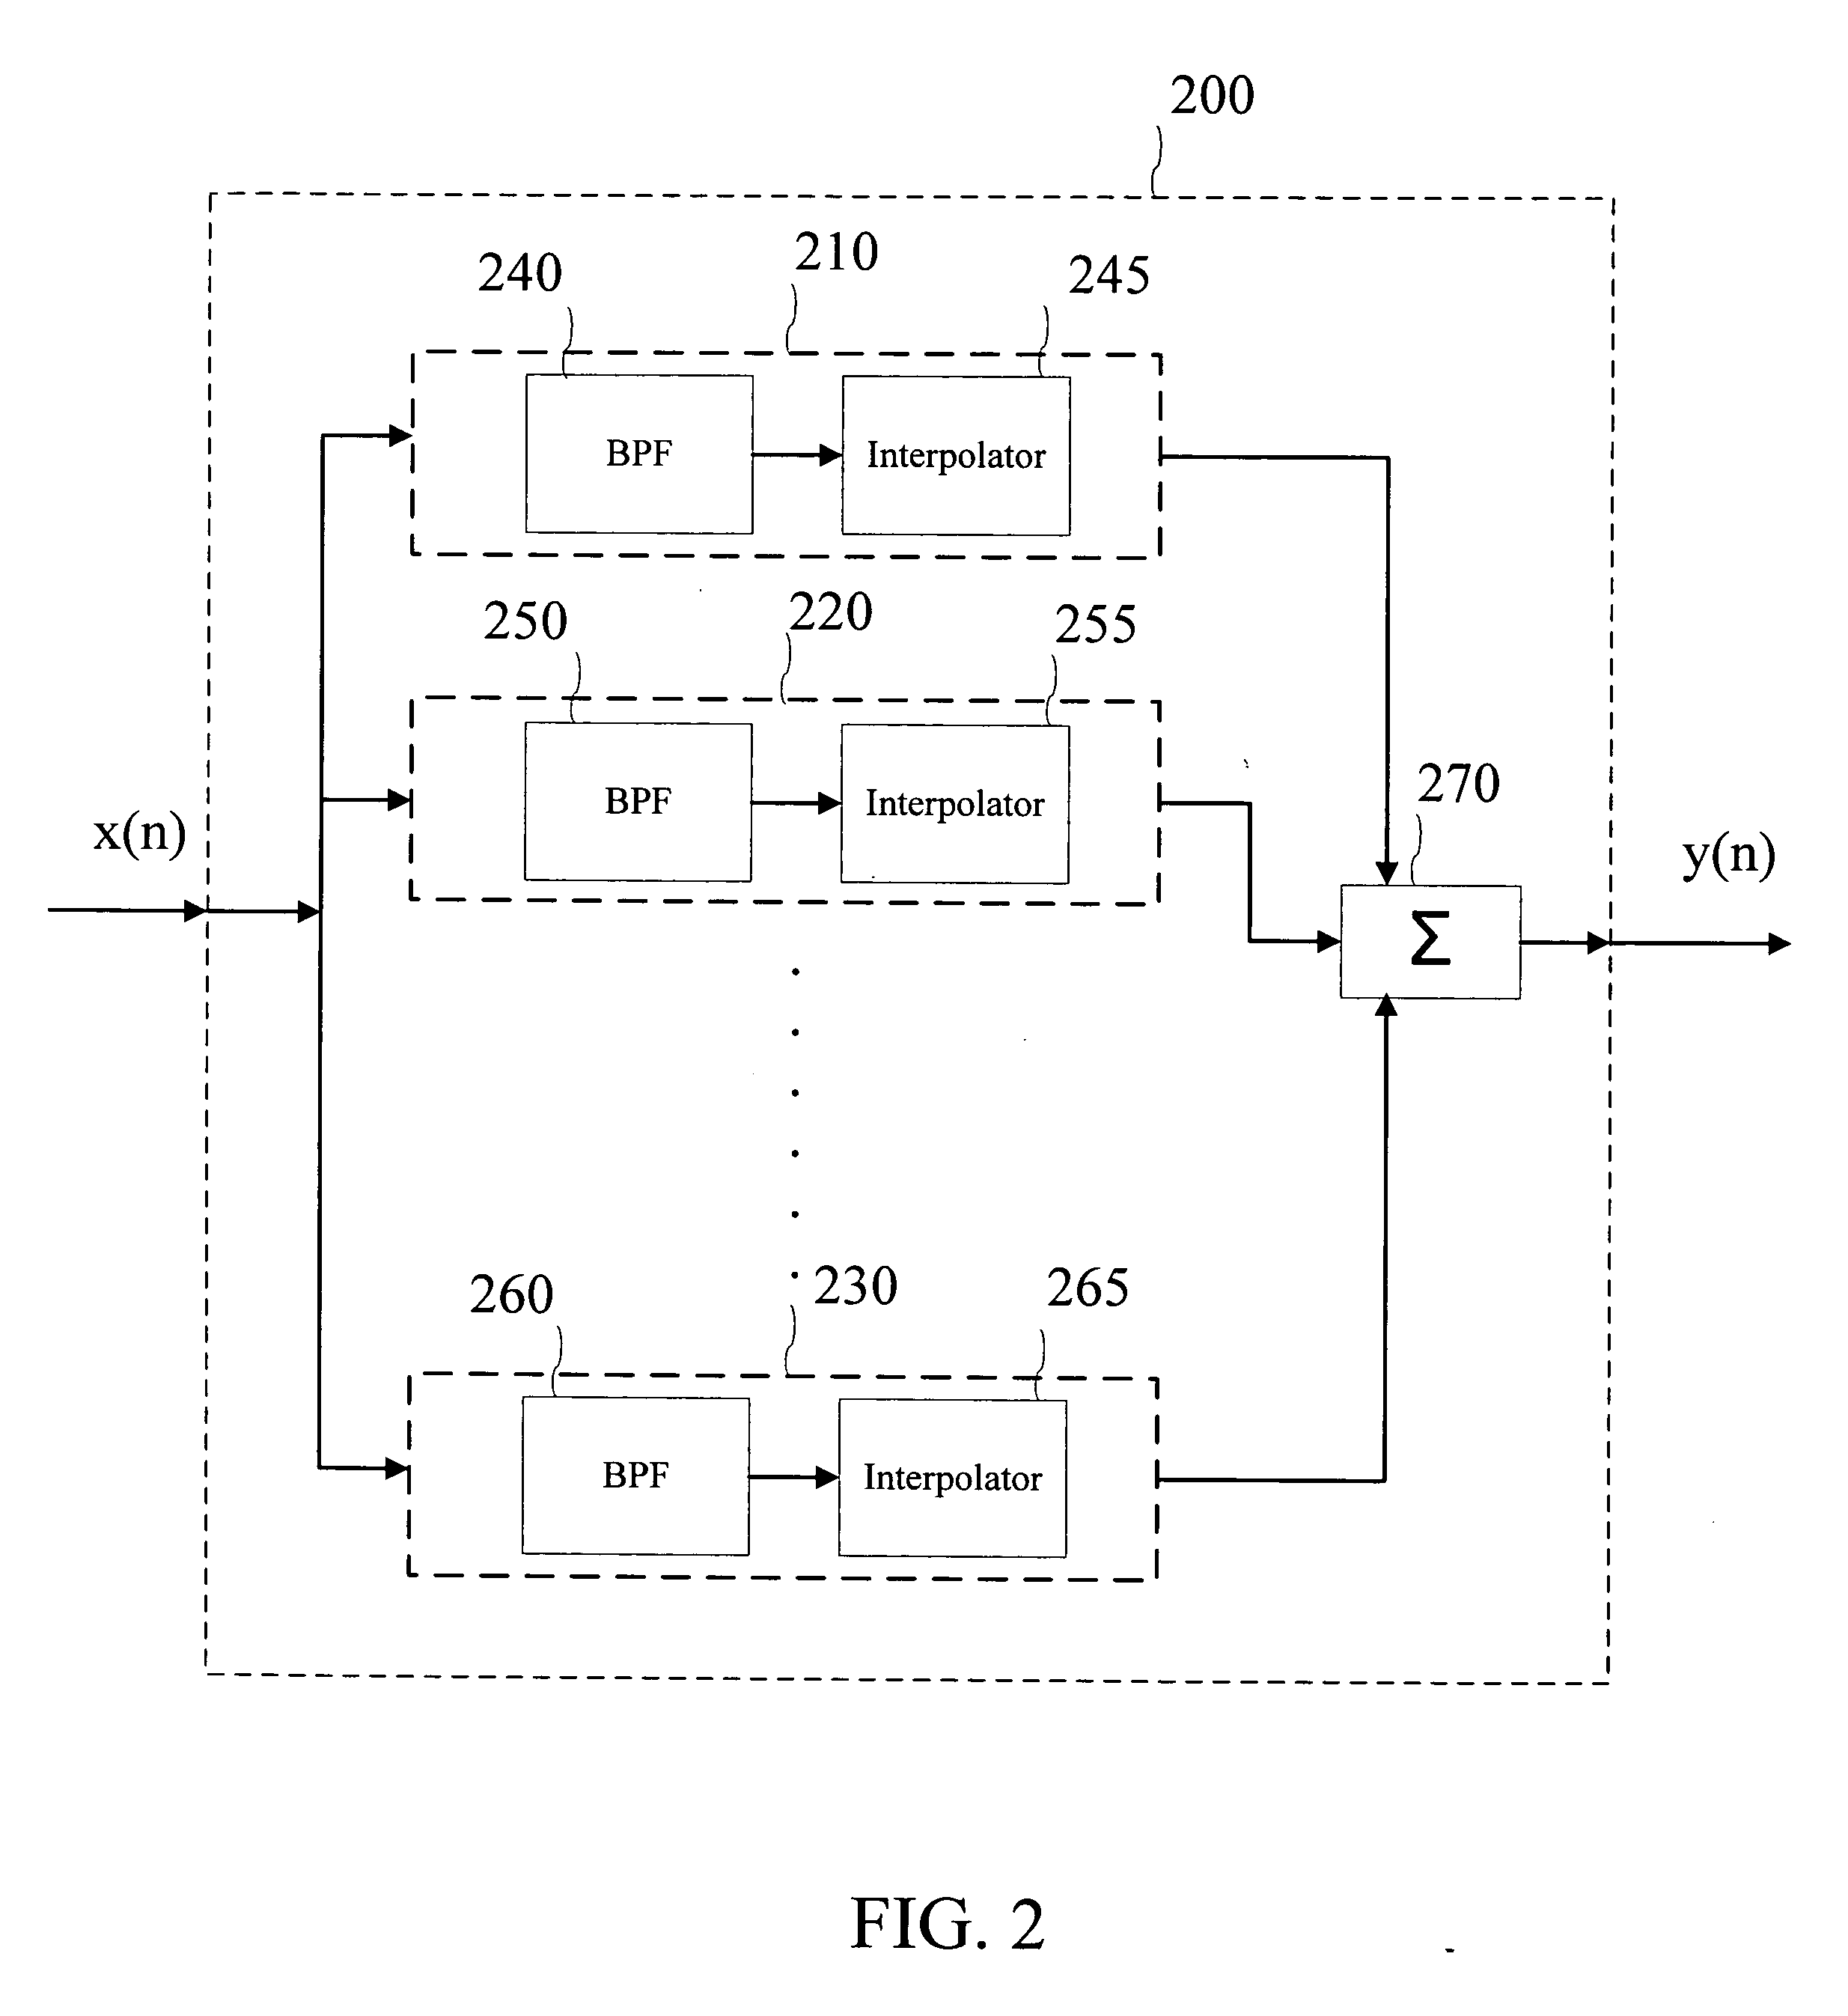 Method and system for playing audio at a decelerated rate using multiresolution analysis technique keeping pitch constant